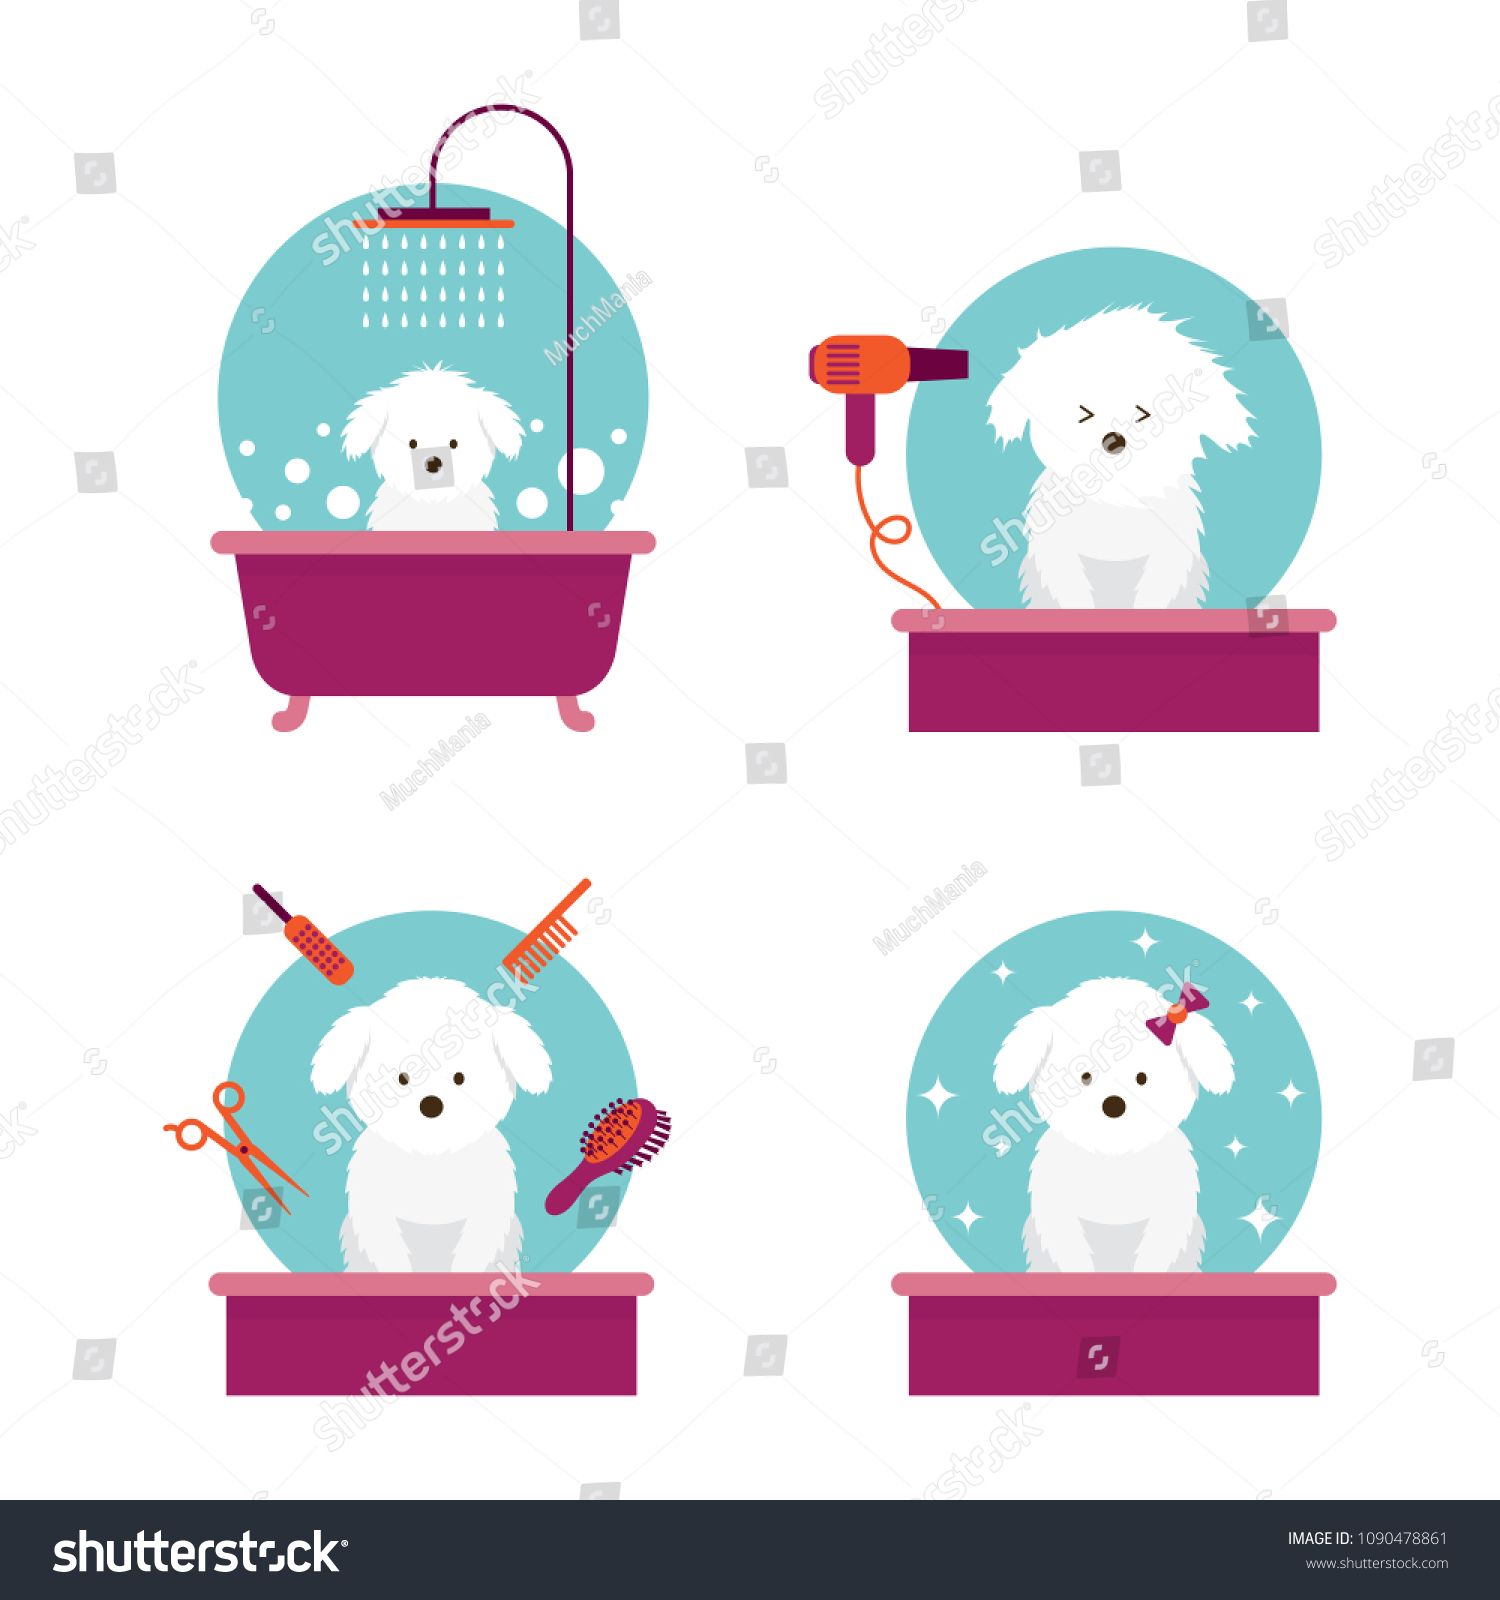 SVG of Dog in Grooming Shop or Salon, Bathing, Cutting, Combing, Hair Drying, Beauty svg